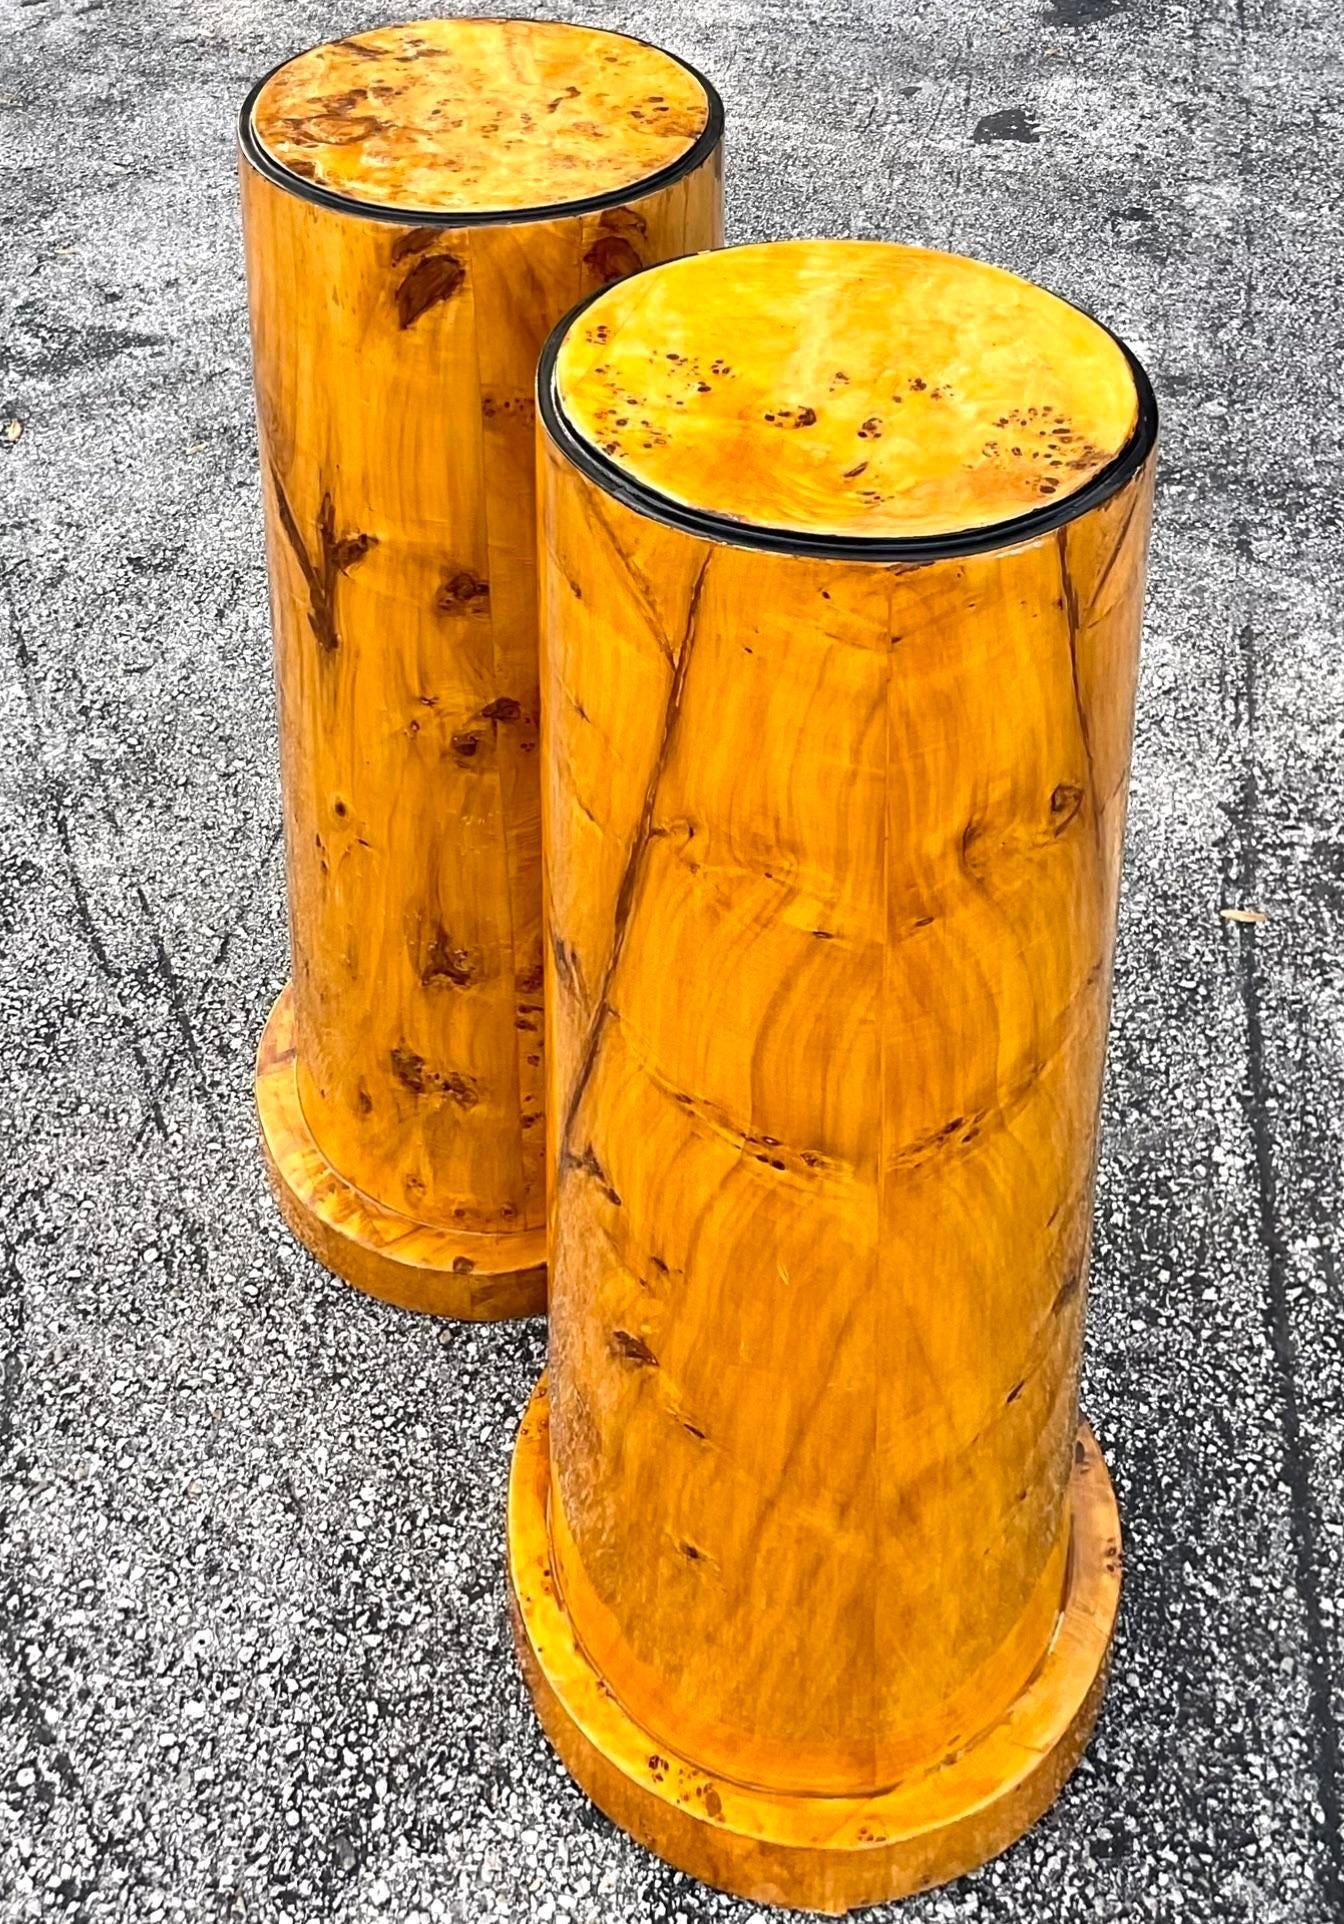 A stunning pair of vintage Boho pedestals. A chic Burl wood construction in a classic cylinder shape. Beautiful high gloss lacquered finish. Acquired from a Palm Beach estate.